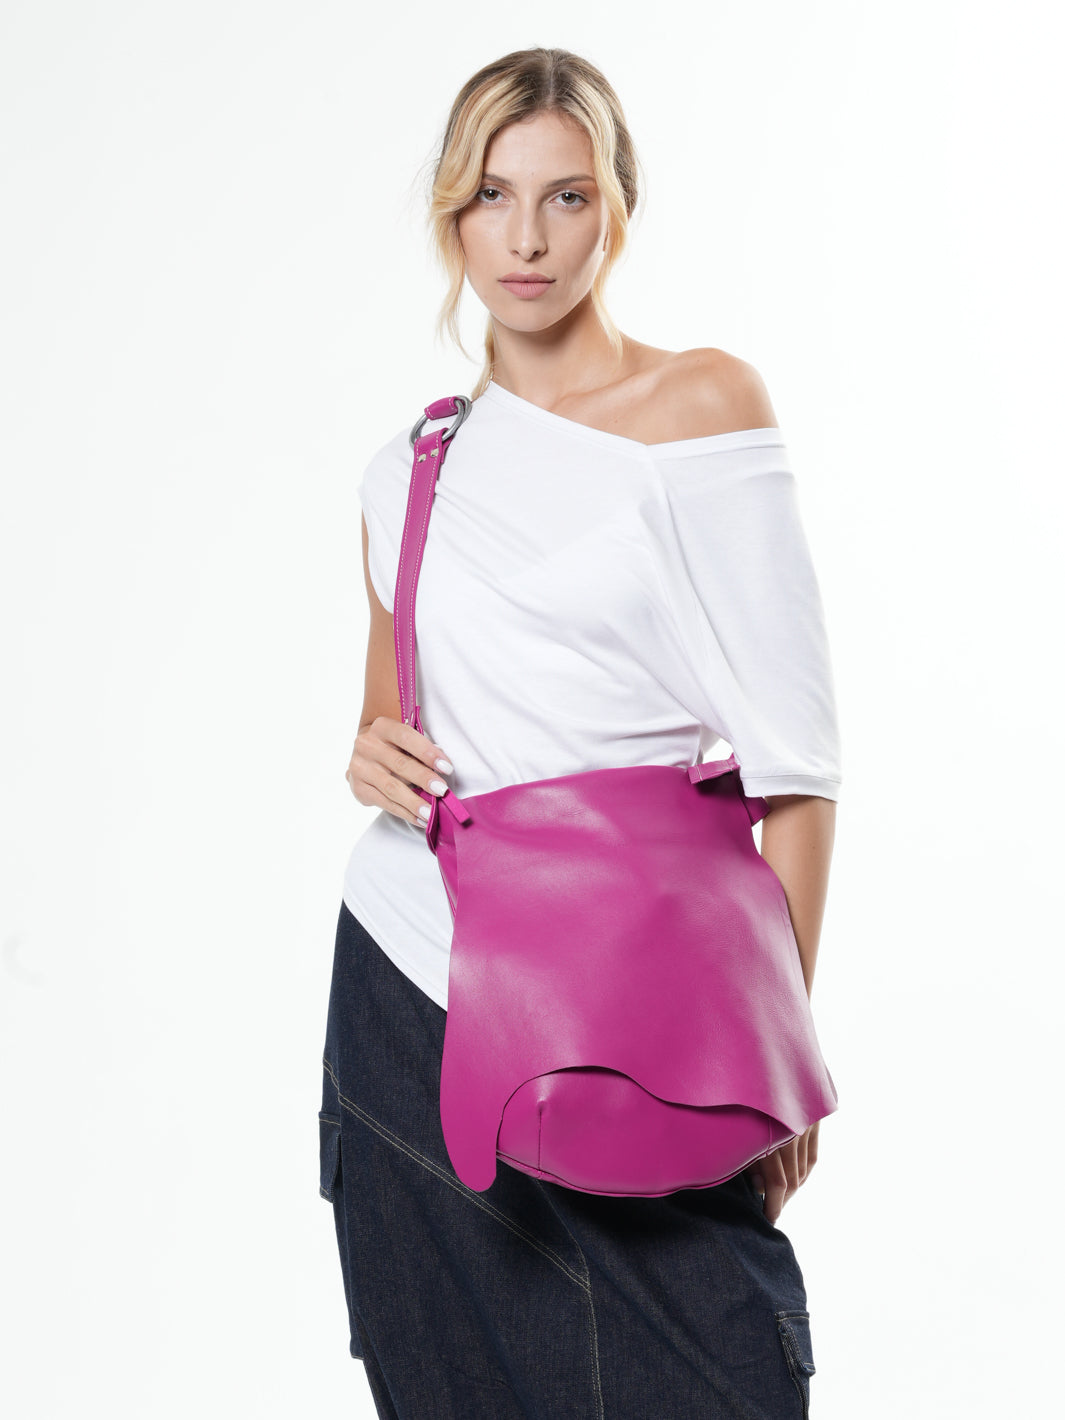 Pink Leather Bag with a Flap